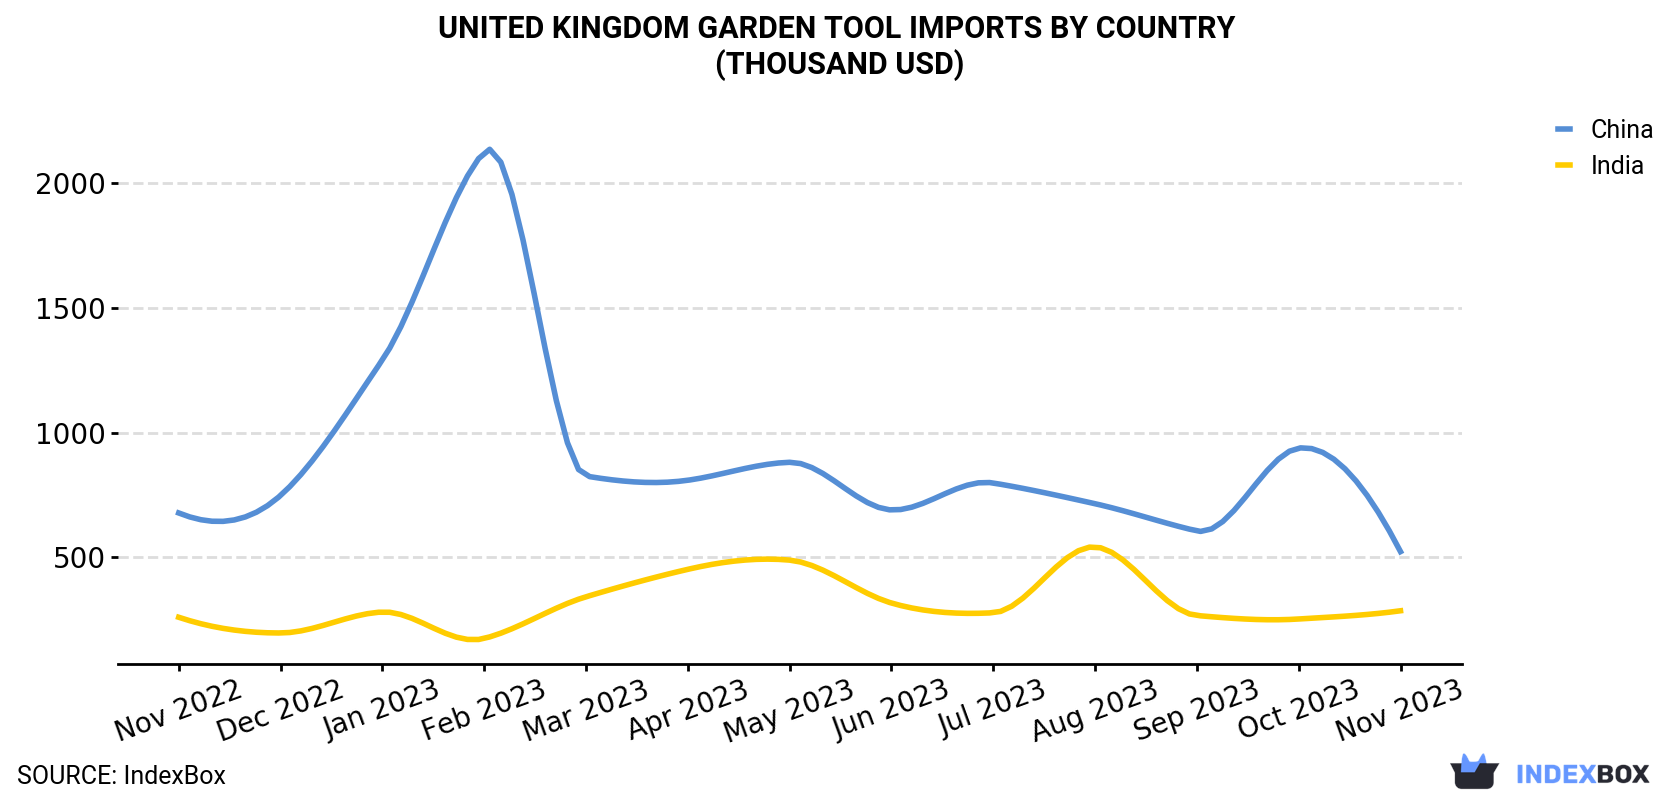 United Kingdom Garden Tool Imports By Country (Thousand USD)